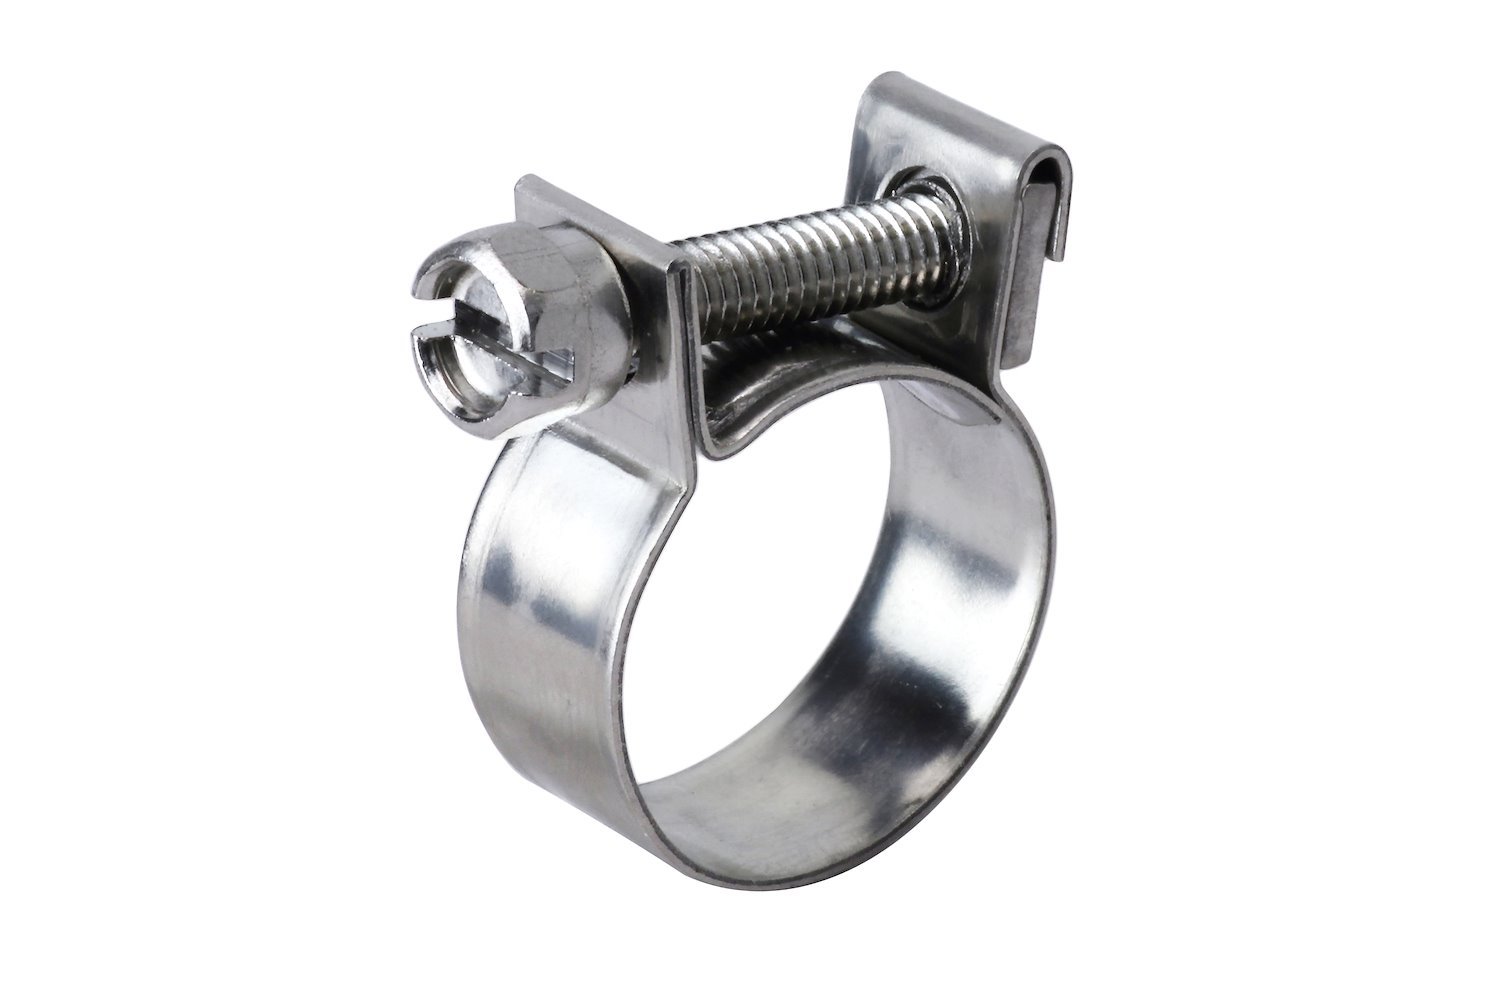 FIC-9 Fuel Injection Hose Clamp, Stainless Steel Small Hose Clamp, SAE Size 11, 23/64 in. - 7/16 in. (9 mm-11 mm)